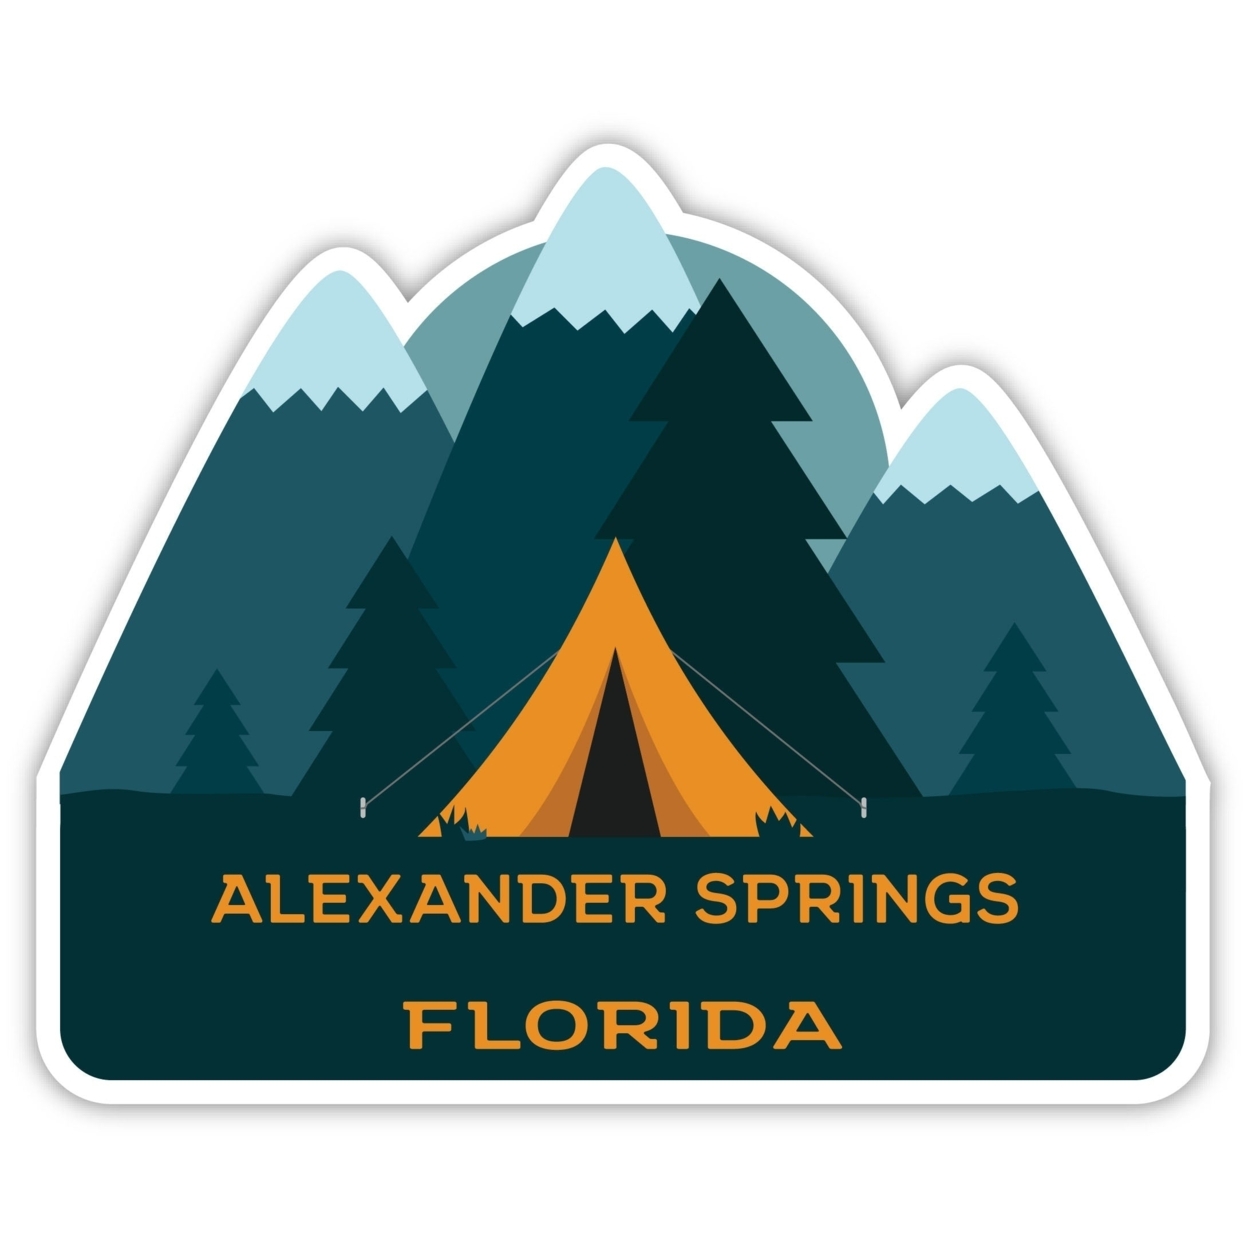 Alexander Springs Florida Souvenir Decorative Stickers (Choose Theme And Size) - 4-Pack, 10-Inch, Bear